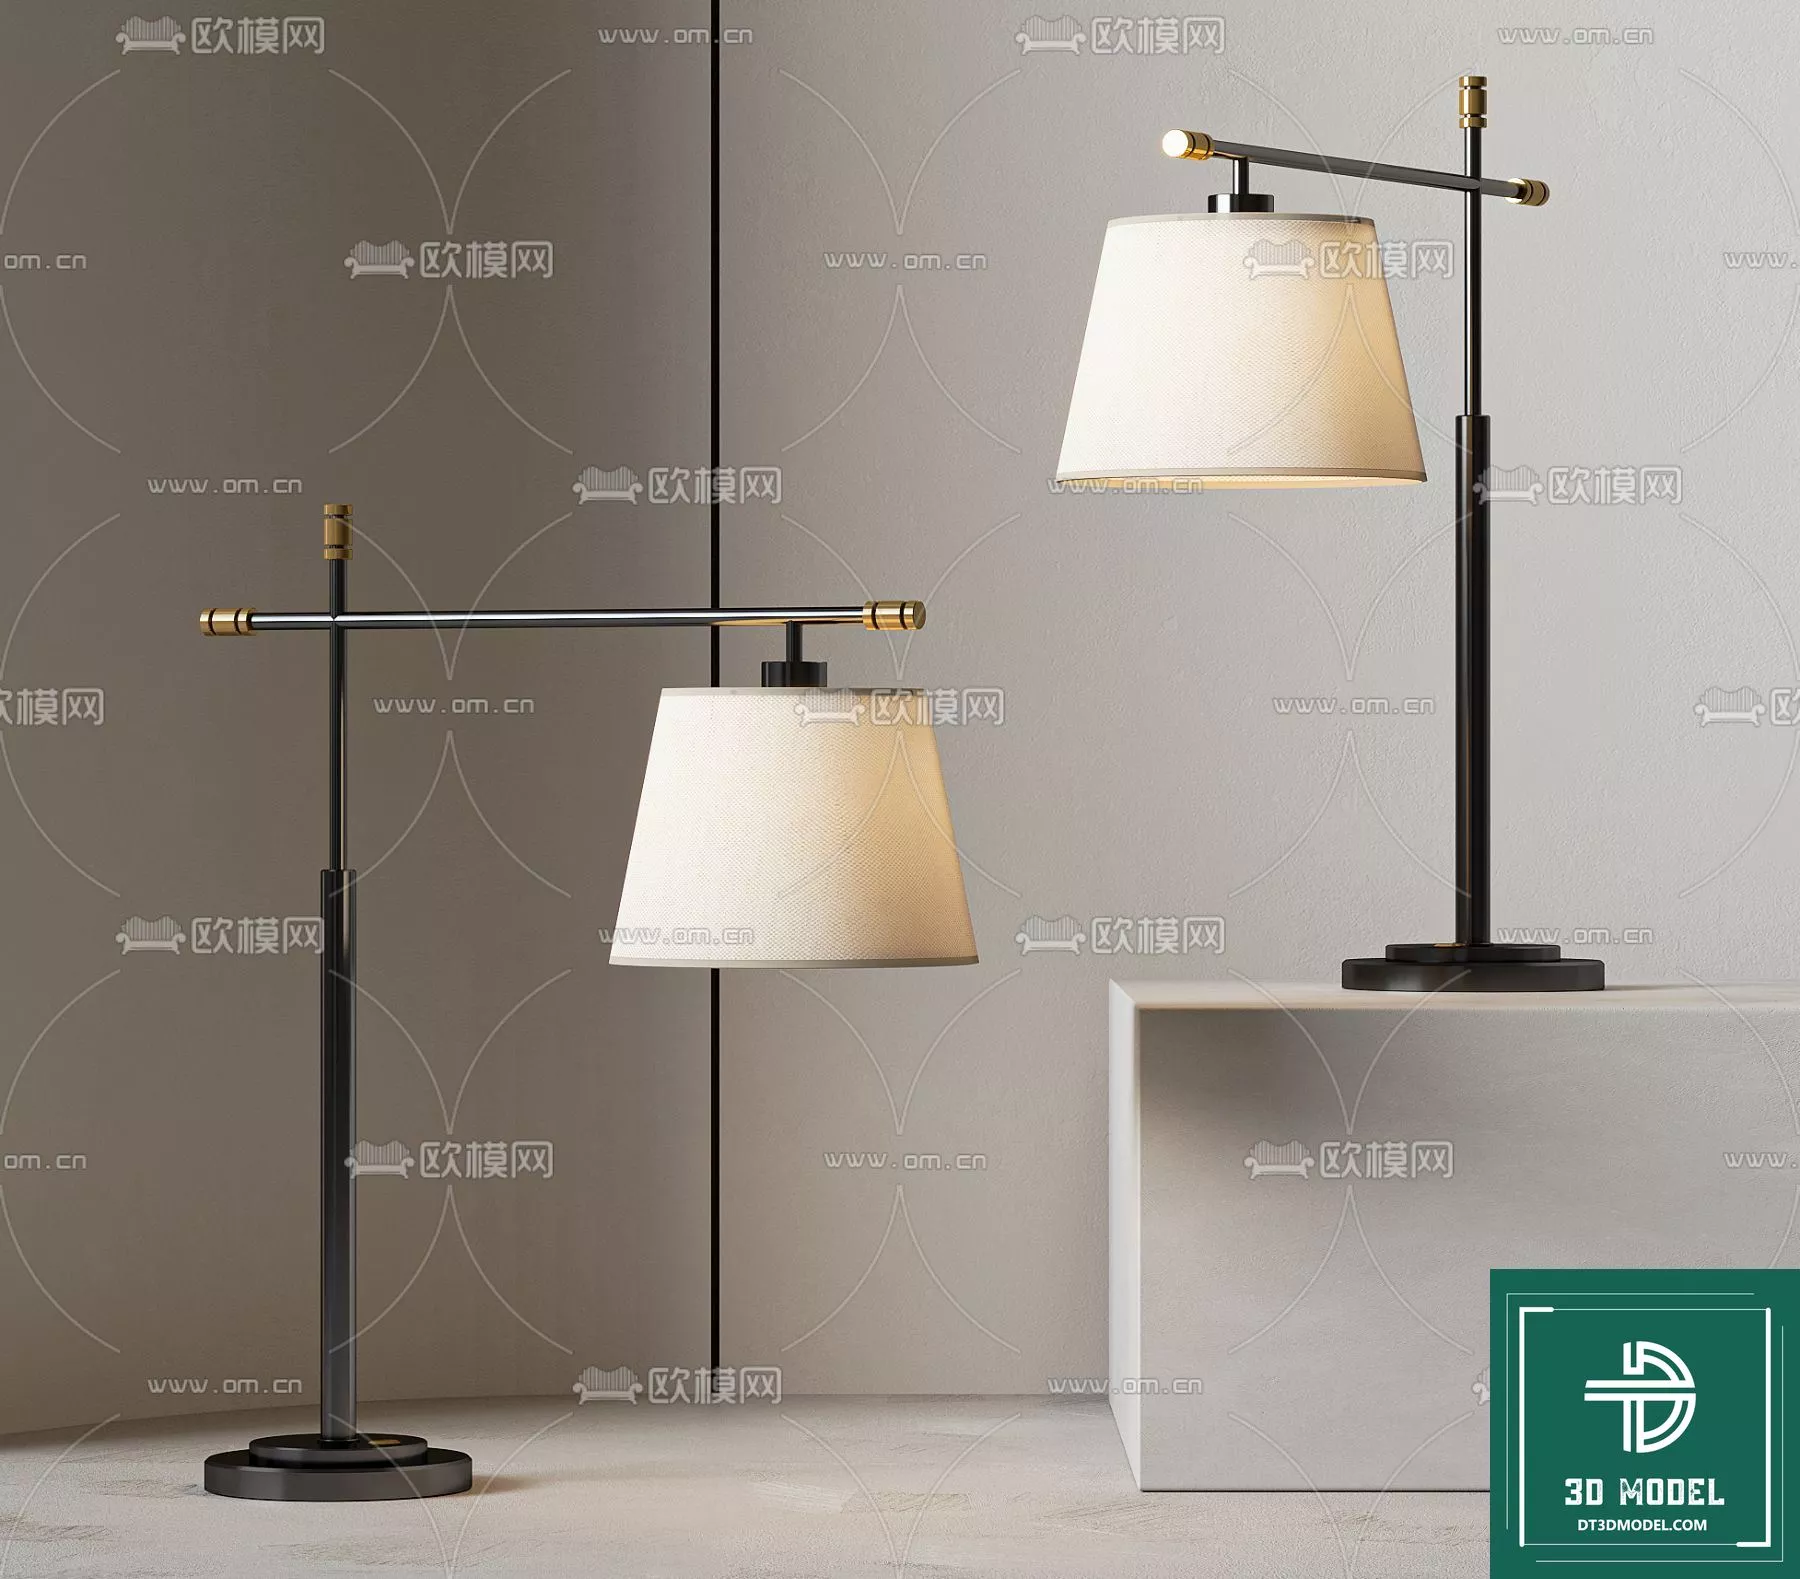 MODERN TABLE LAMP - SKETCHUP 3D MODEL - VRAY OR ENSCAPE - ID14532